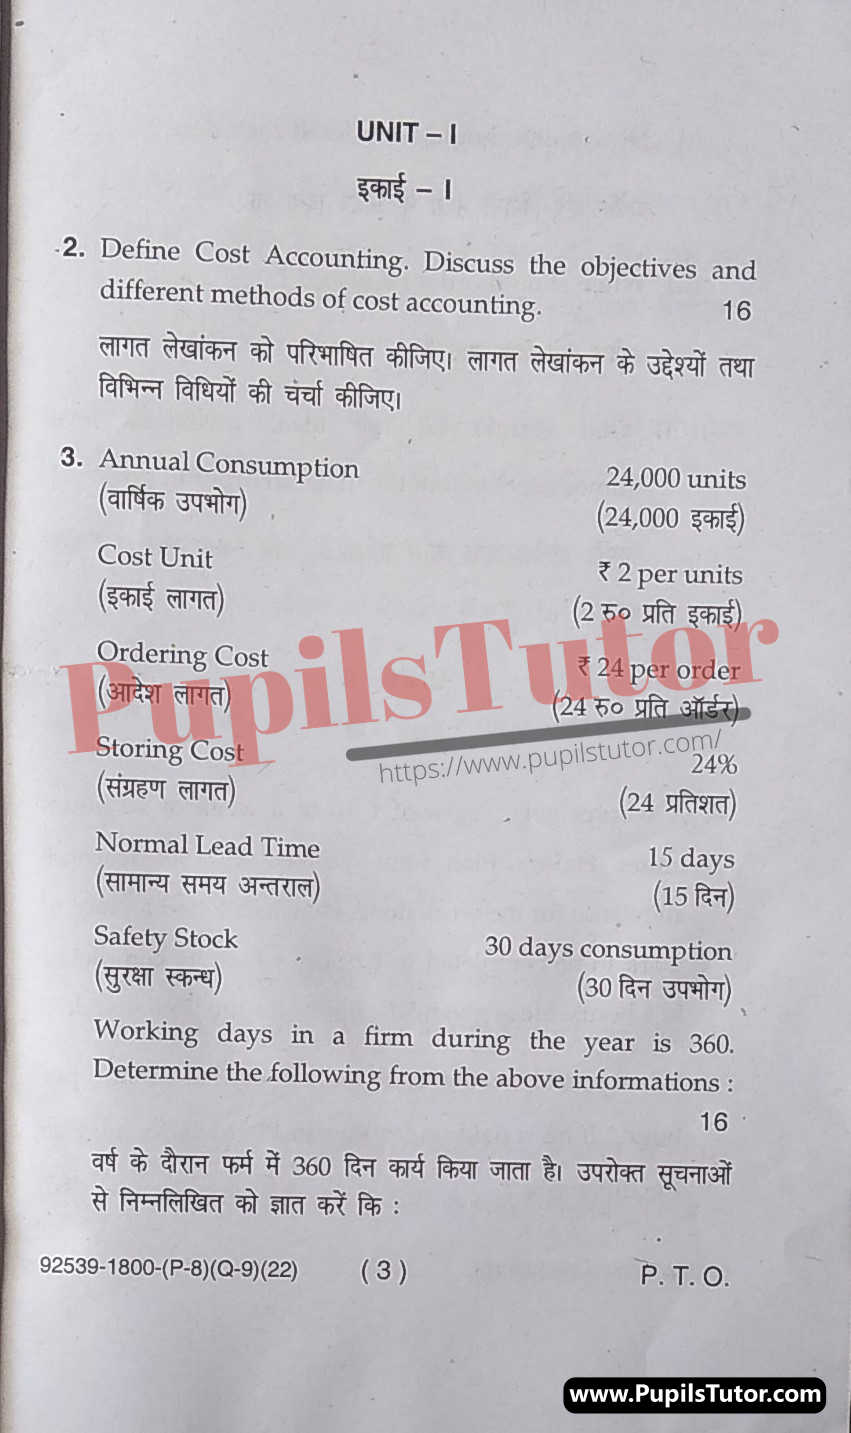 Free Download PDF Of M.D. University B.Com. (Hons.) Third Semester Latest Question Paper For Cost Accounting Subject (Page 3) - https://www.pupilstutor.com